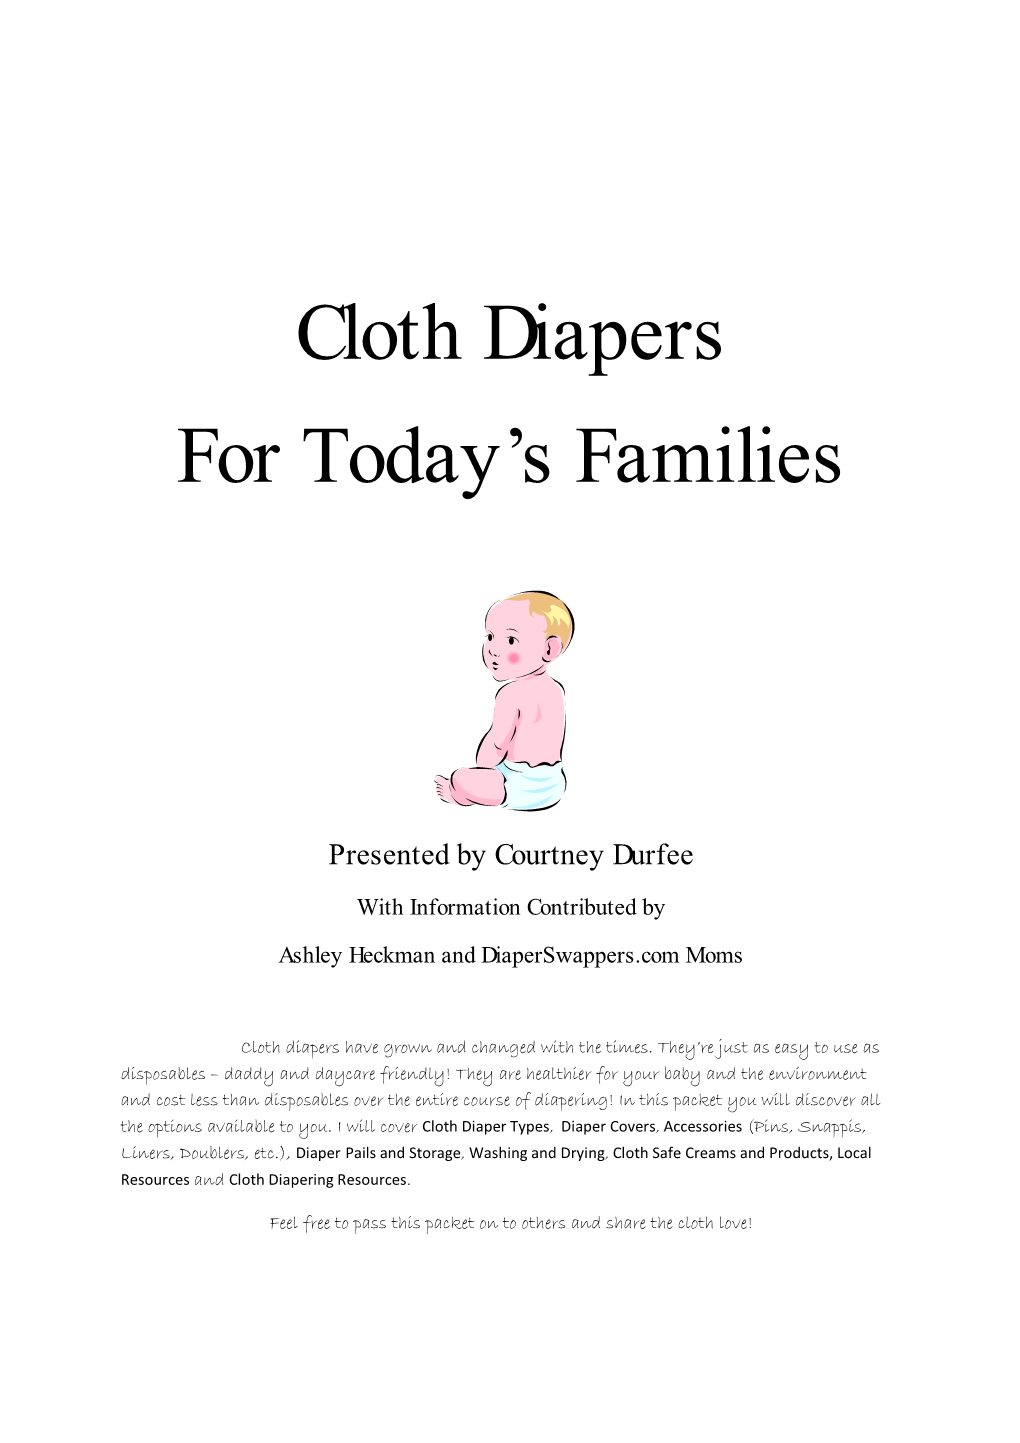 Intro to Cloth Diapers Parent Resource Book